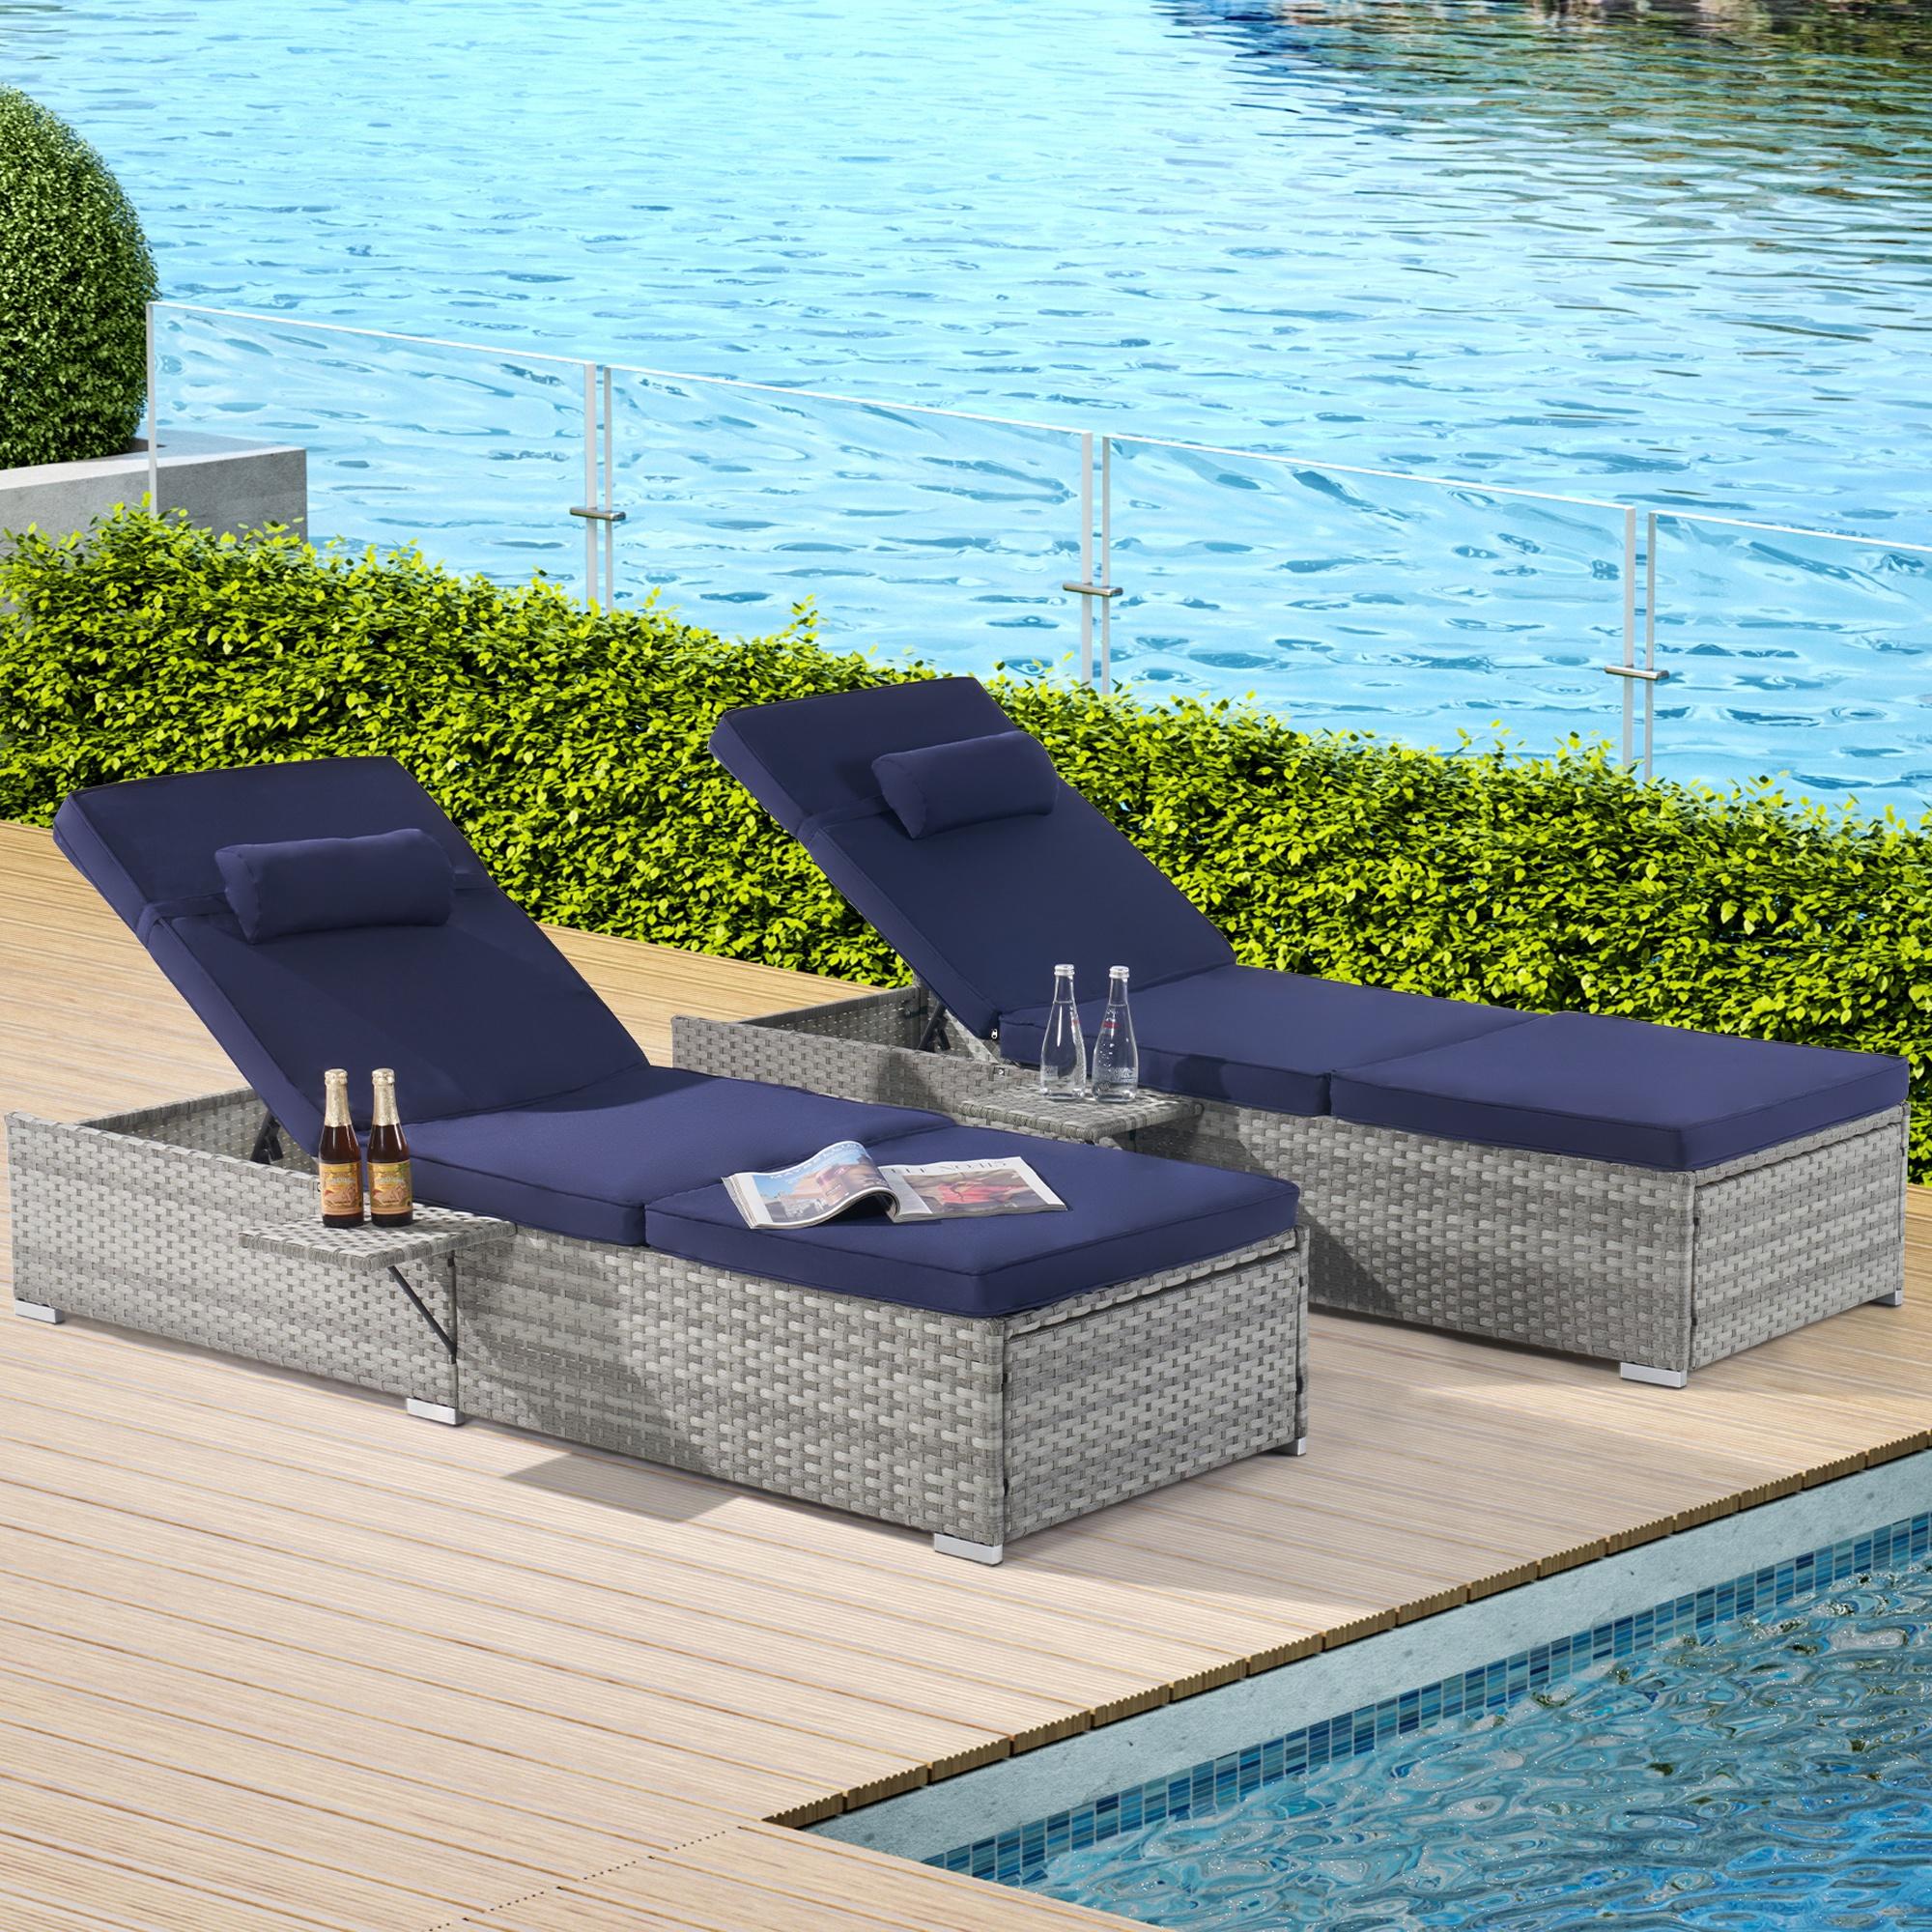 Chaise Lounge Chairs Set, Outdoor Lounger Reclining Chairs with 5 Adjustable Positions, Brown Wicker Patio Chaise Chair Furniture for Poolside, Deck, Backyard - image 1 of 10